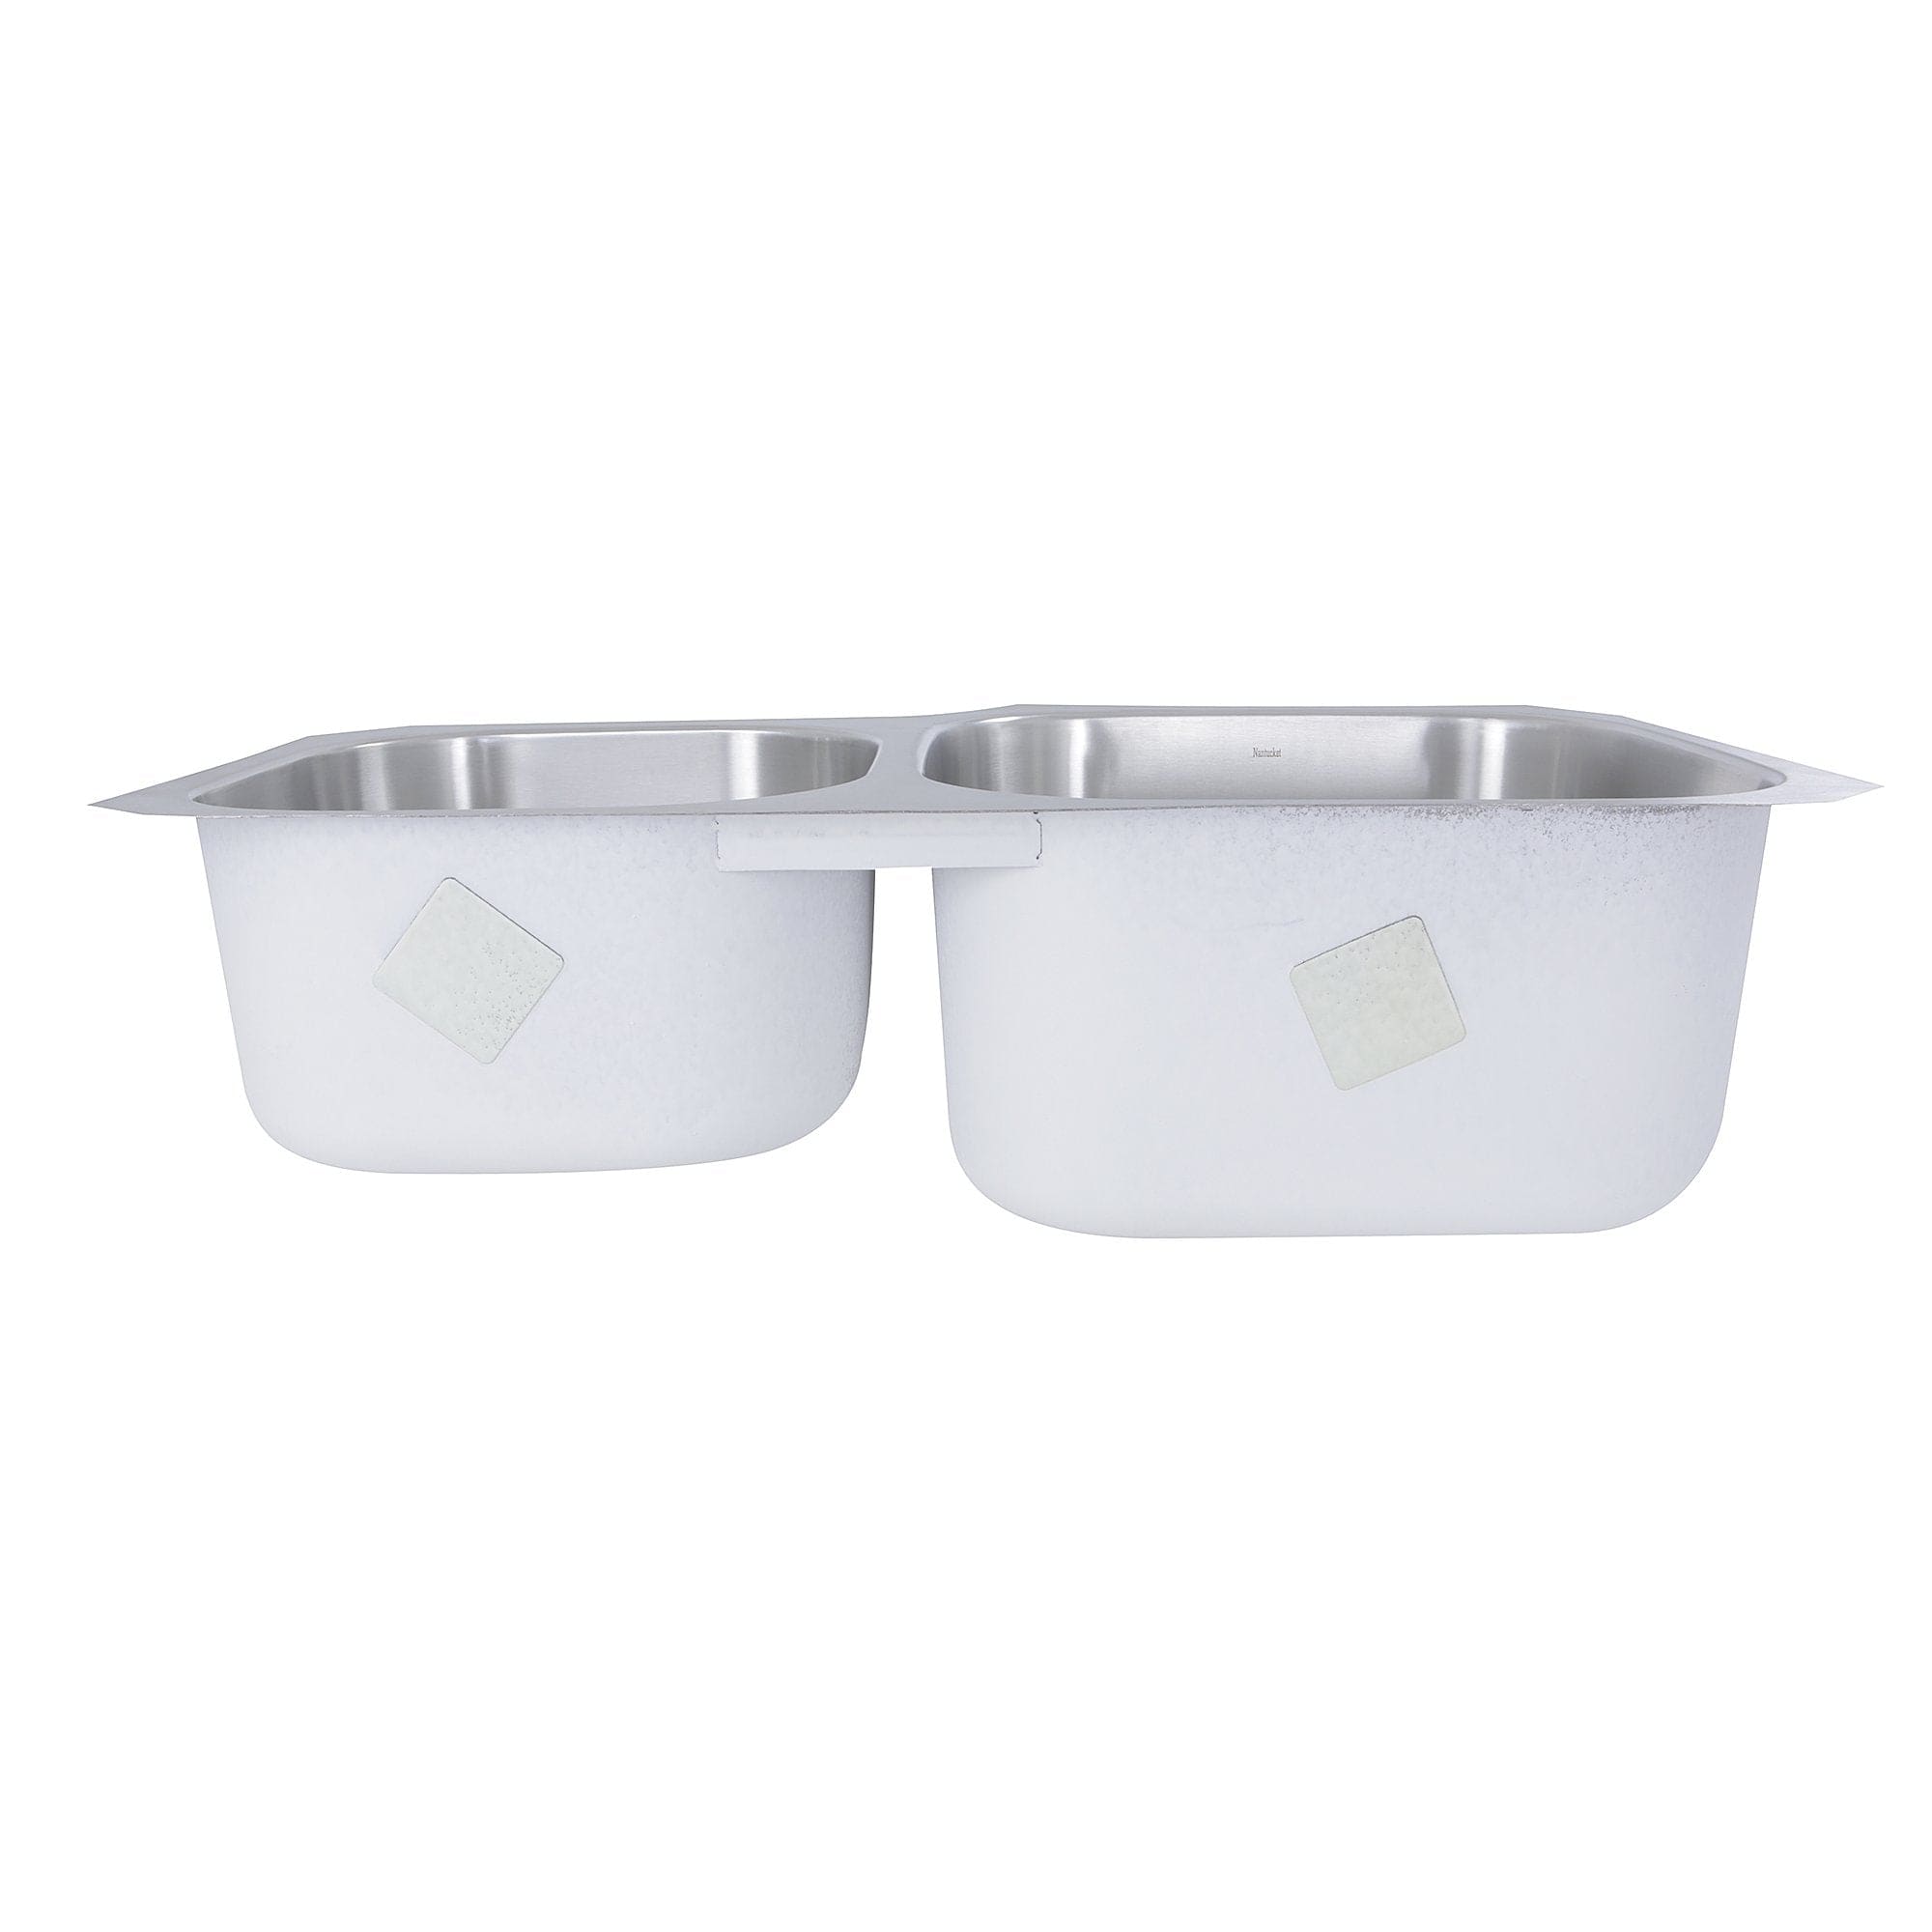 Nantucket 35" Double bowl Undermount Stainless Steel Kitchen Sink - NS3520-R-16 - Manor House Sinks